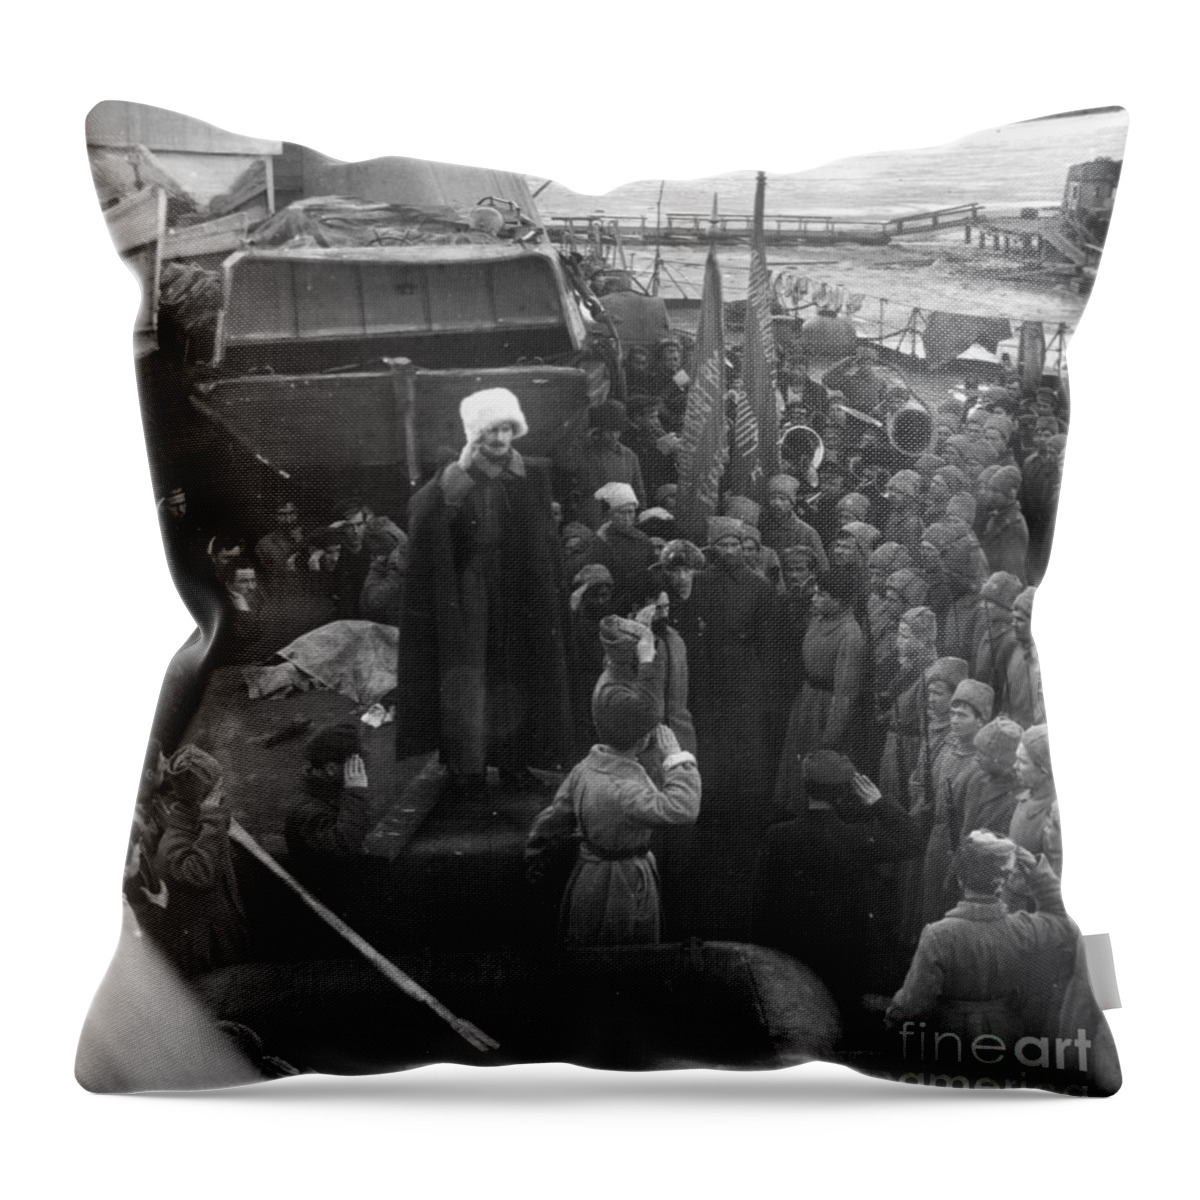 1921 Throw Pillow featuring the photograph Kronstadt Mutiny, 1921 by Granger